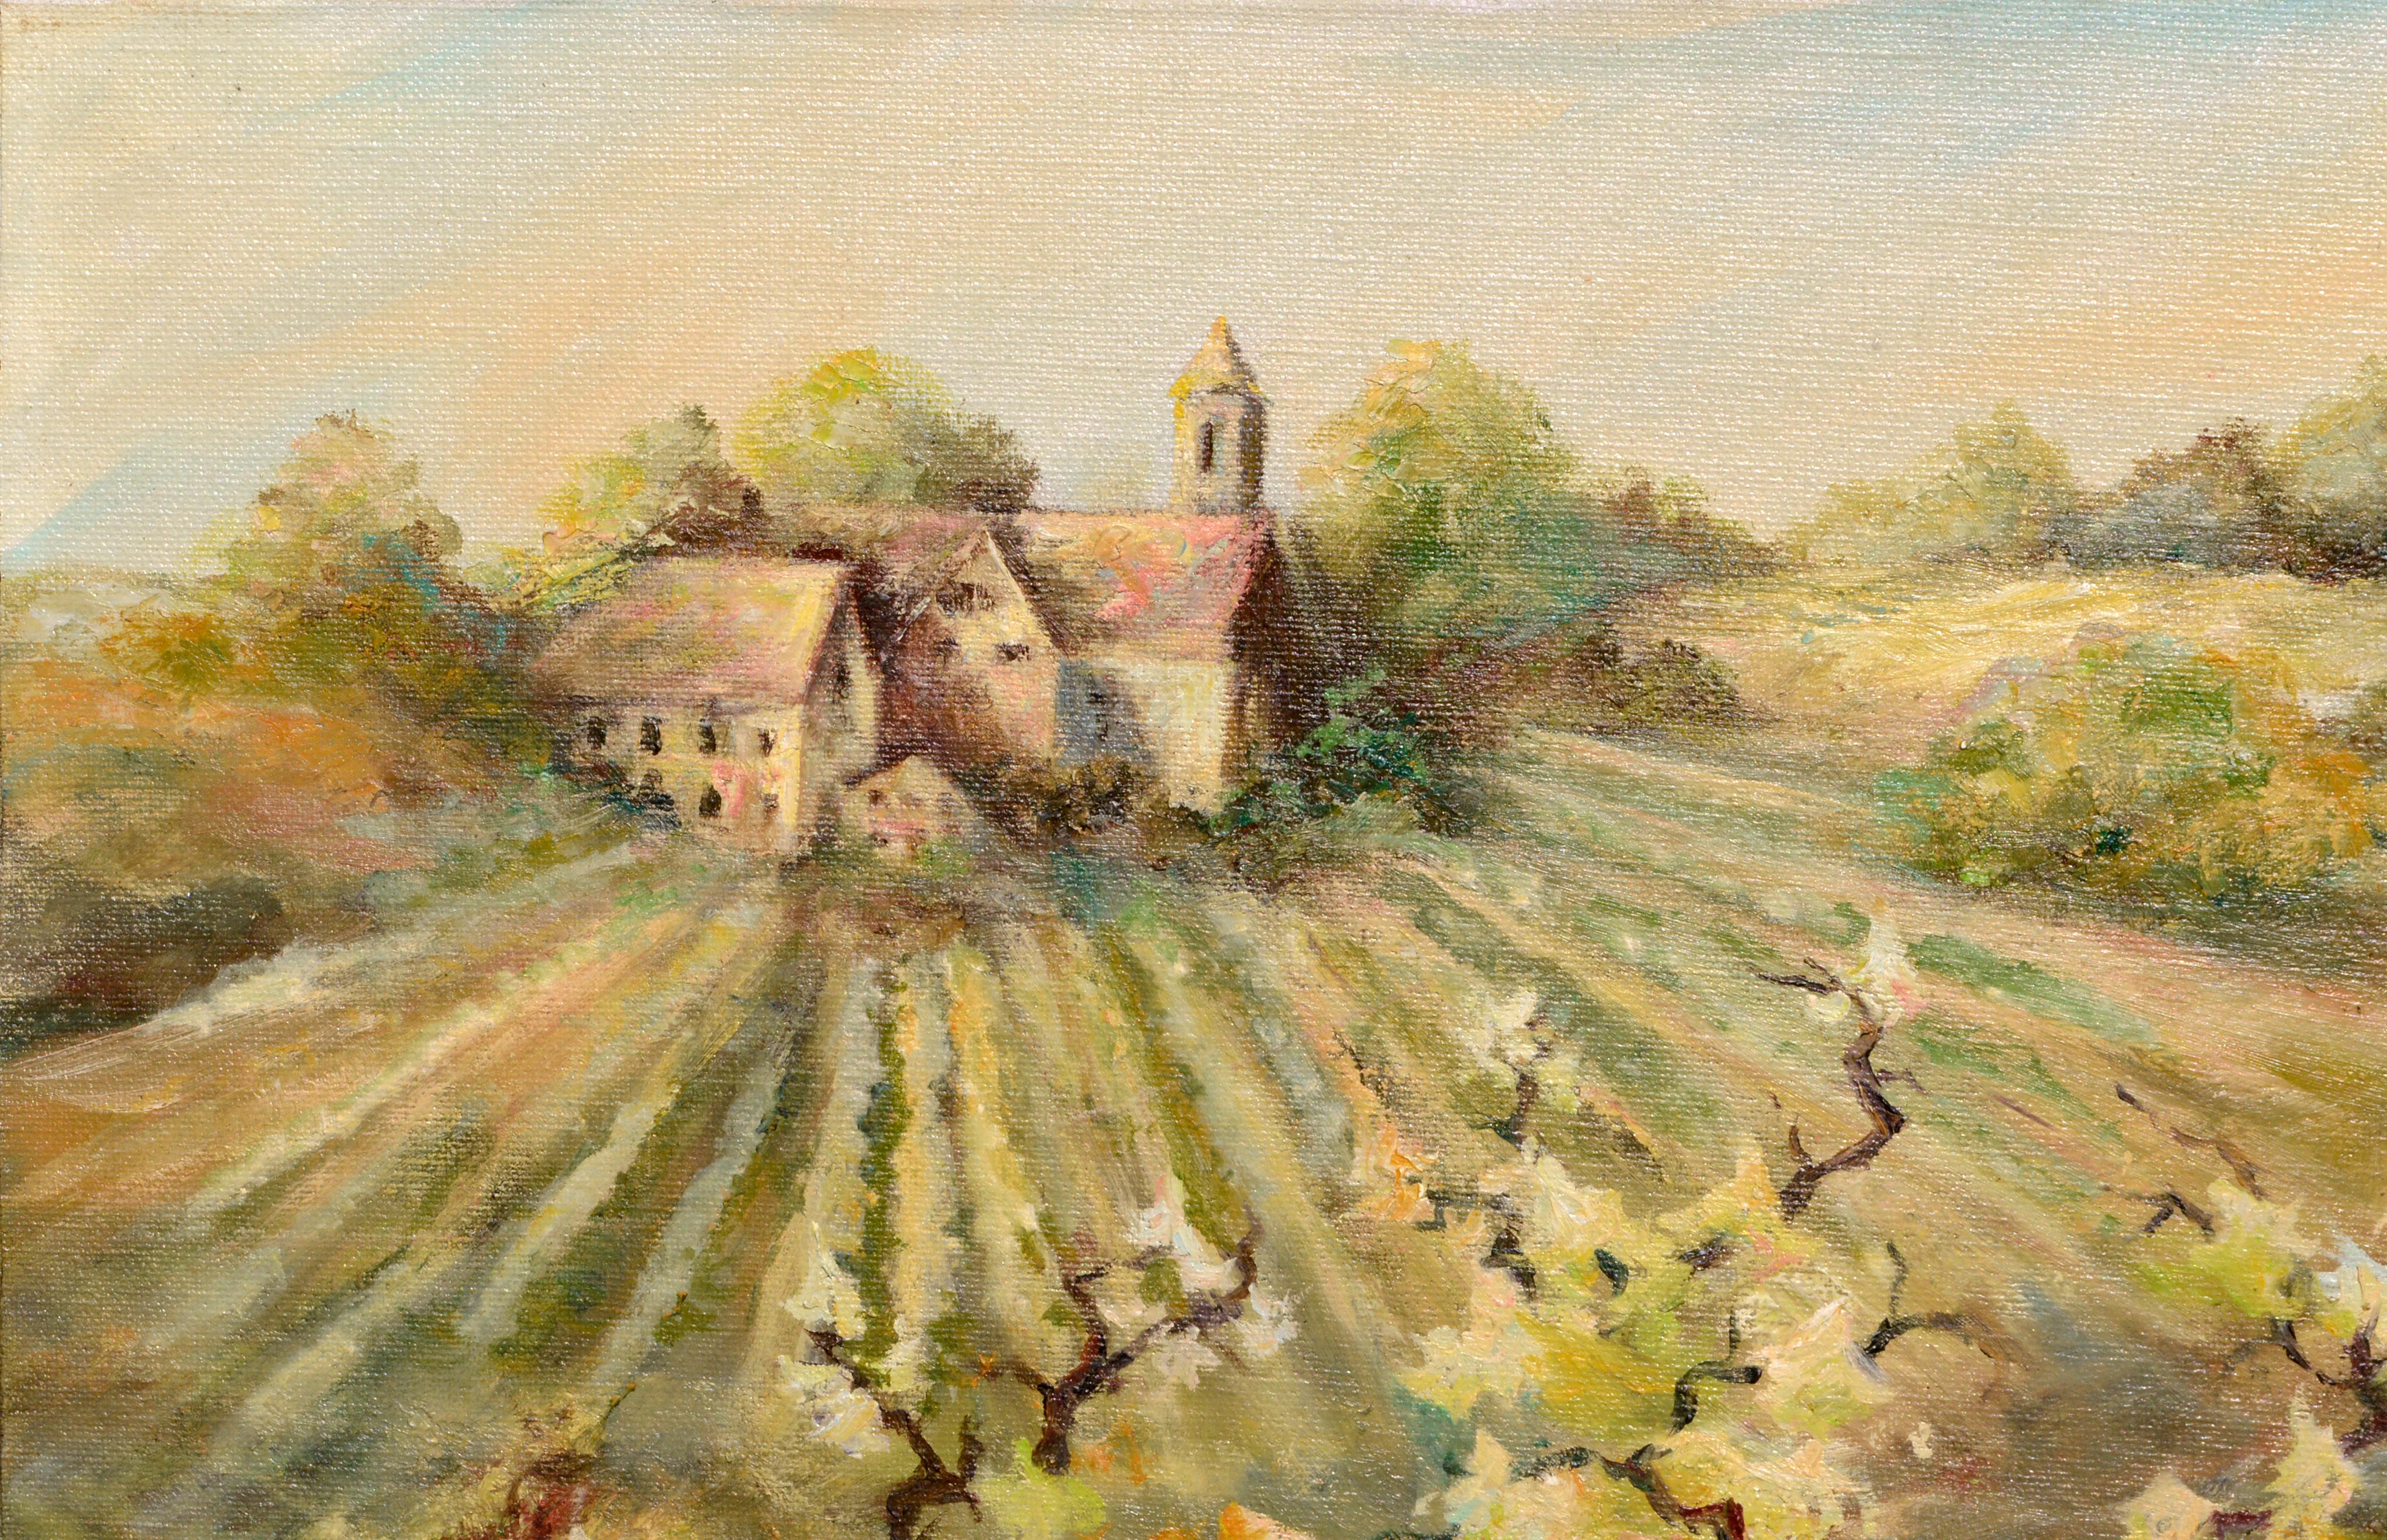 Vineyard Estate, Winery Landscape with Grape Vines  - Painting by Jeane Kluga